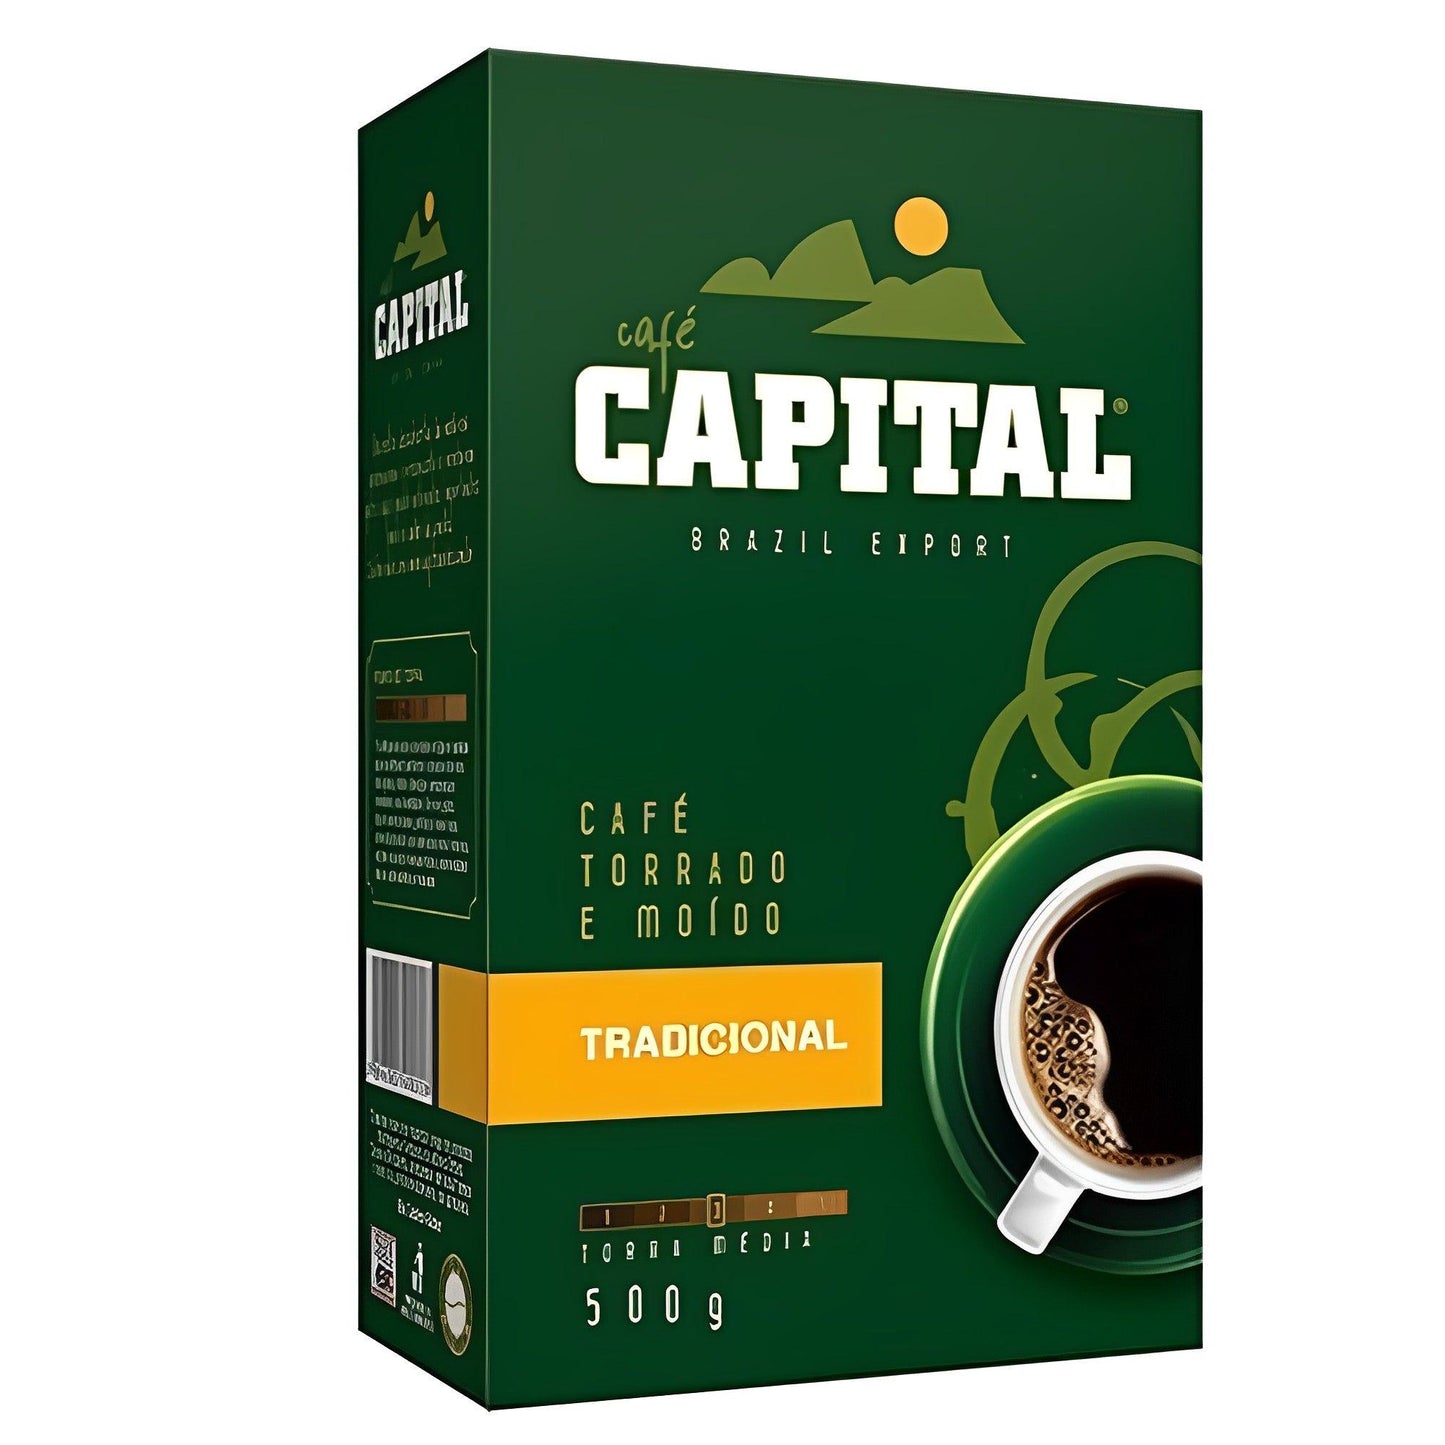 Café Capital Traditional Vacuum-Packed 17.64 oz. (Pack of 2) - Brazilian Shop